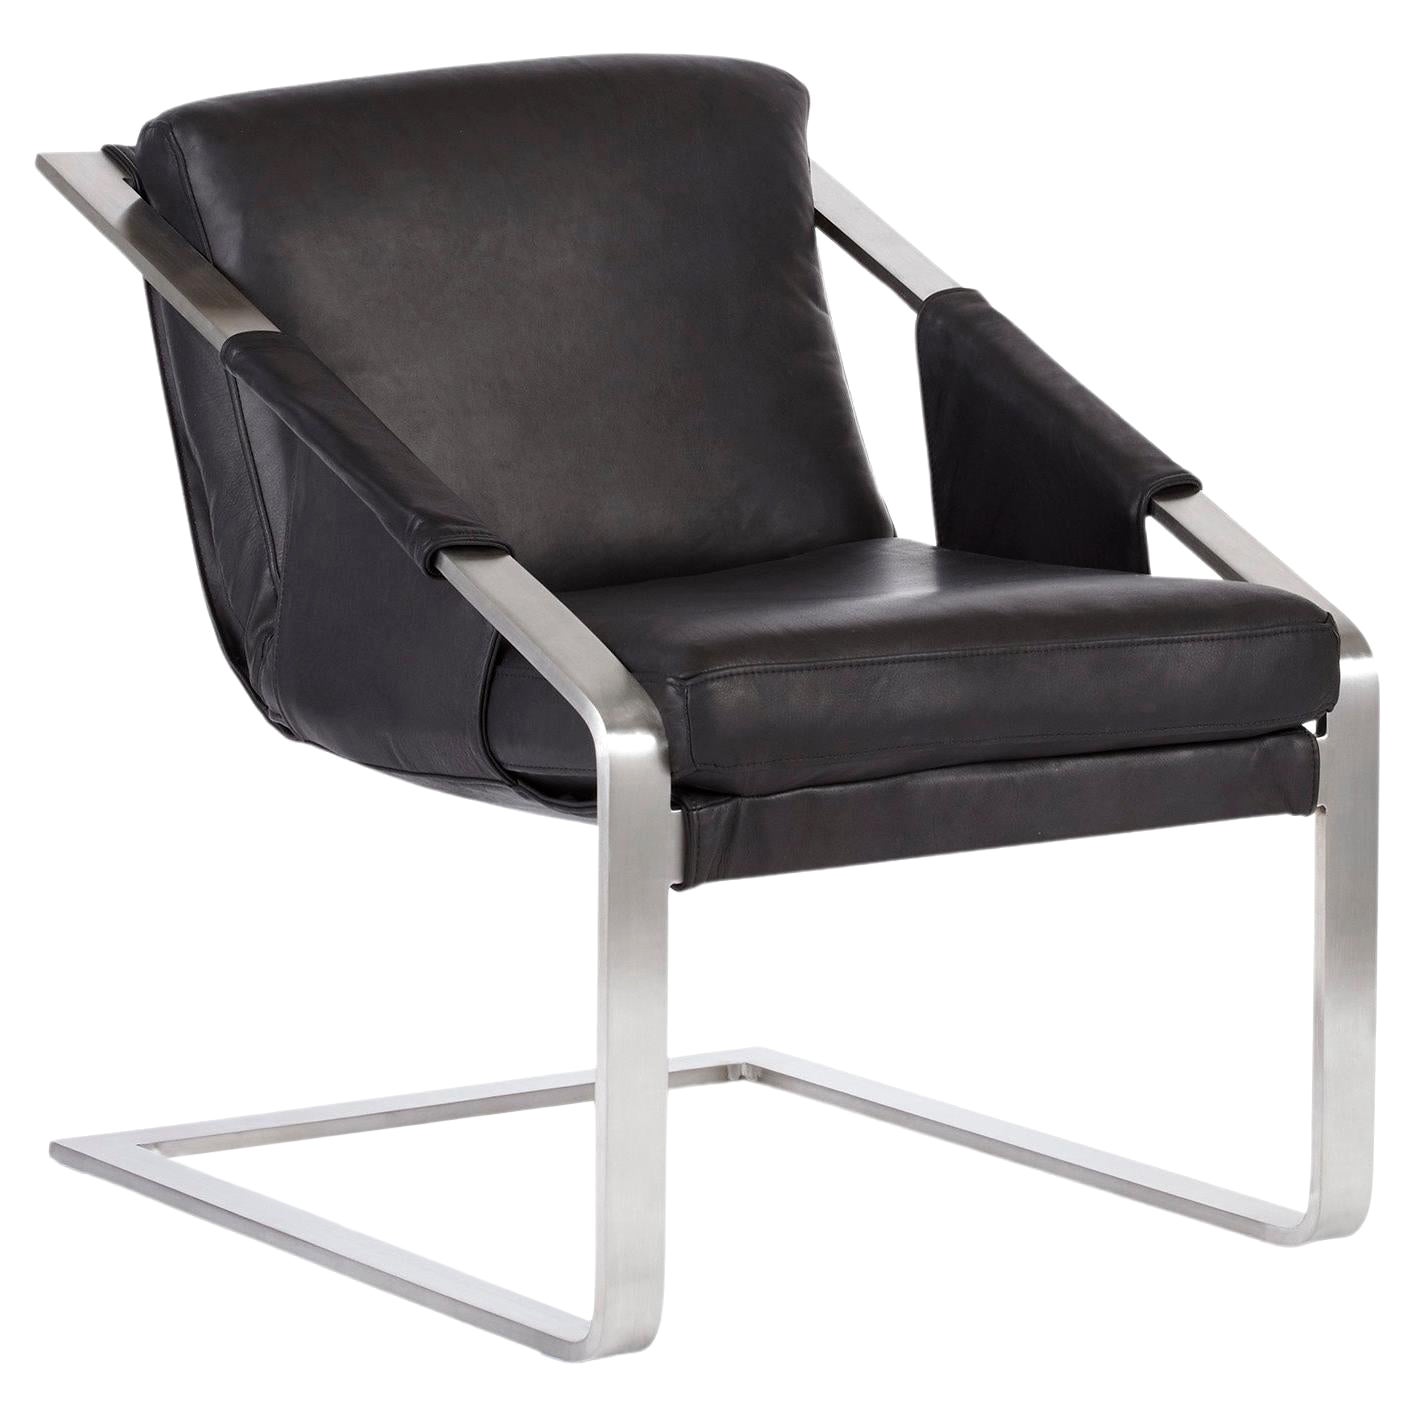 Garcon Chair in Black Nubuck Leather For Sale